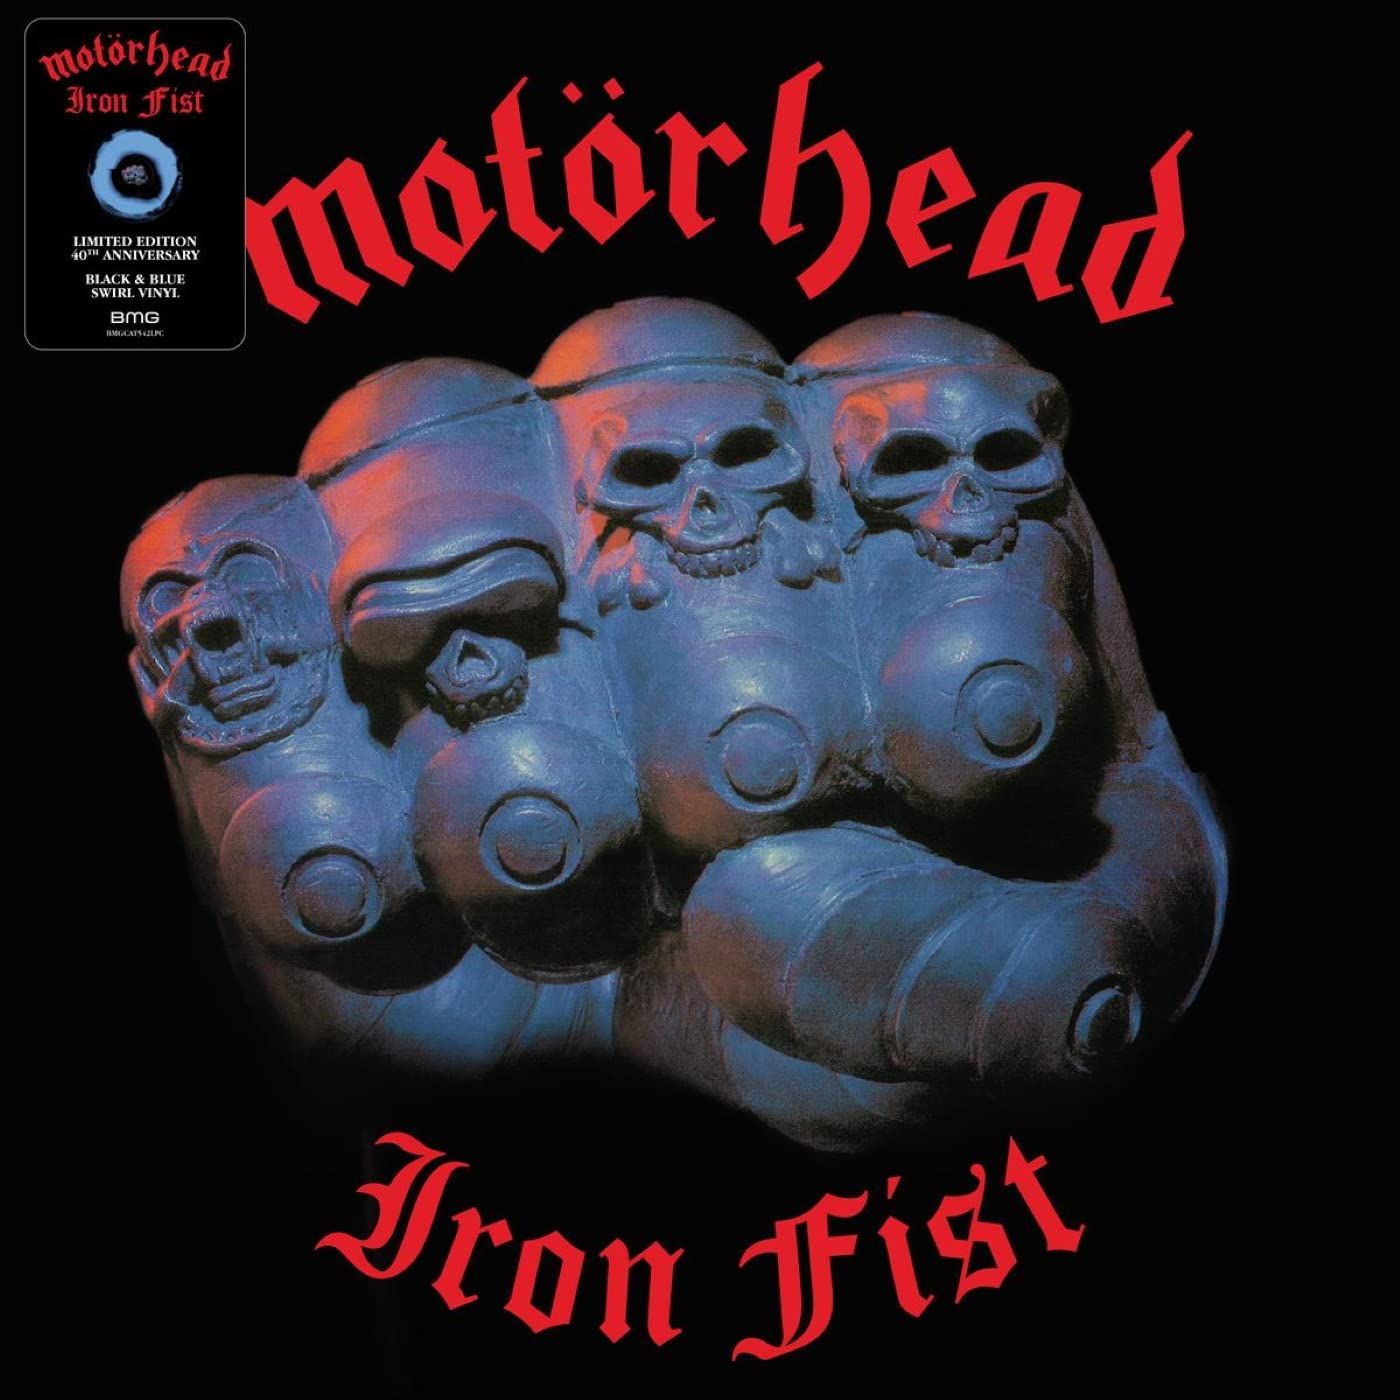 IRON FIST (40TH ANNIVERSARY LIMITED DELUXE EDITION)